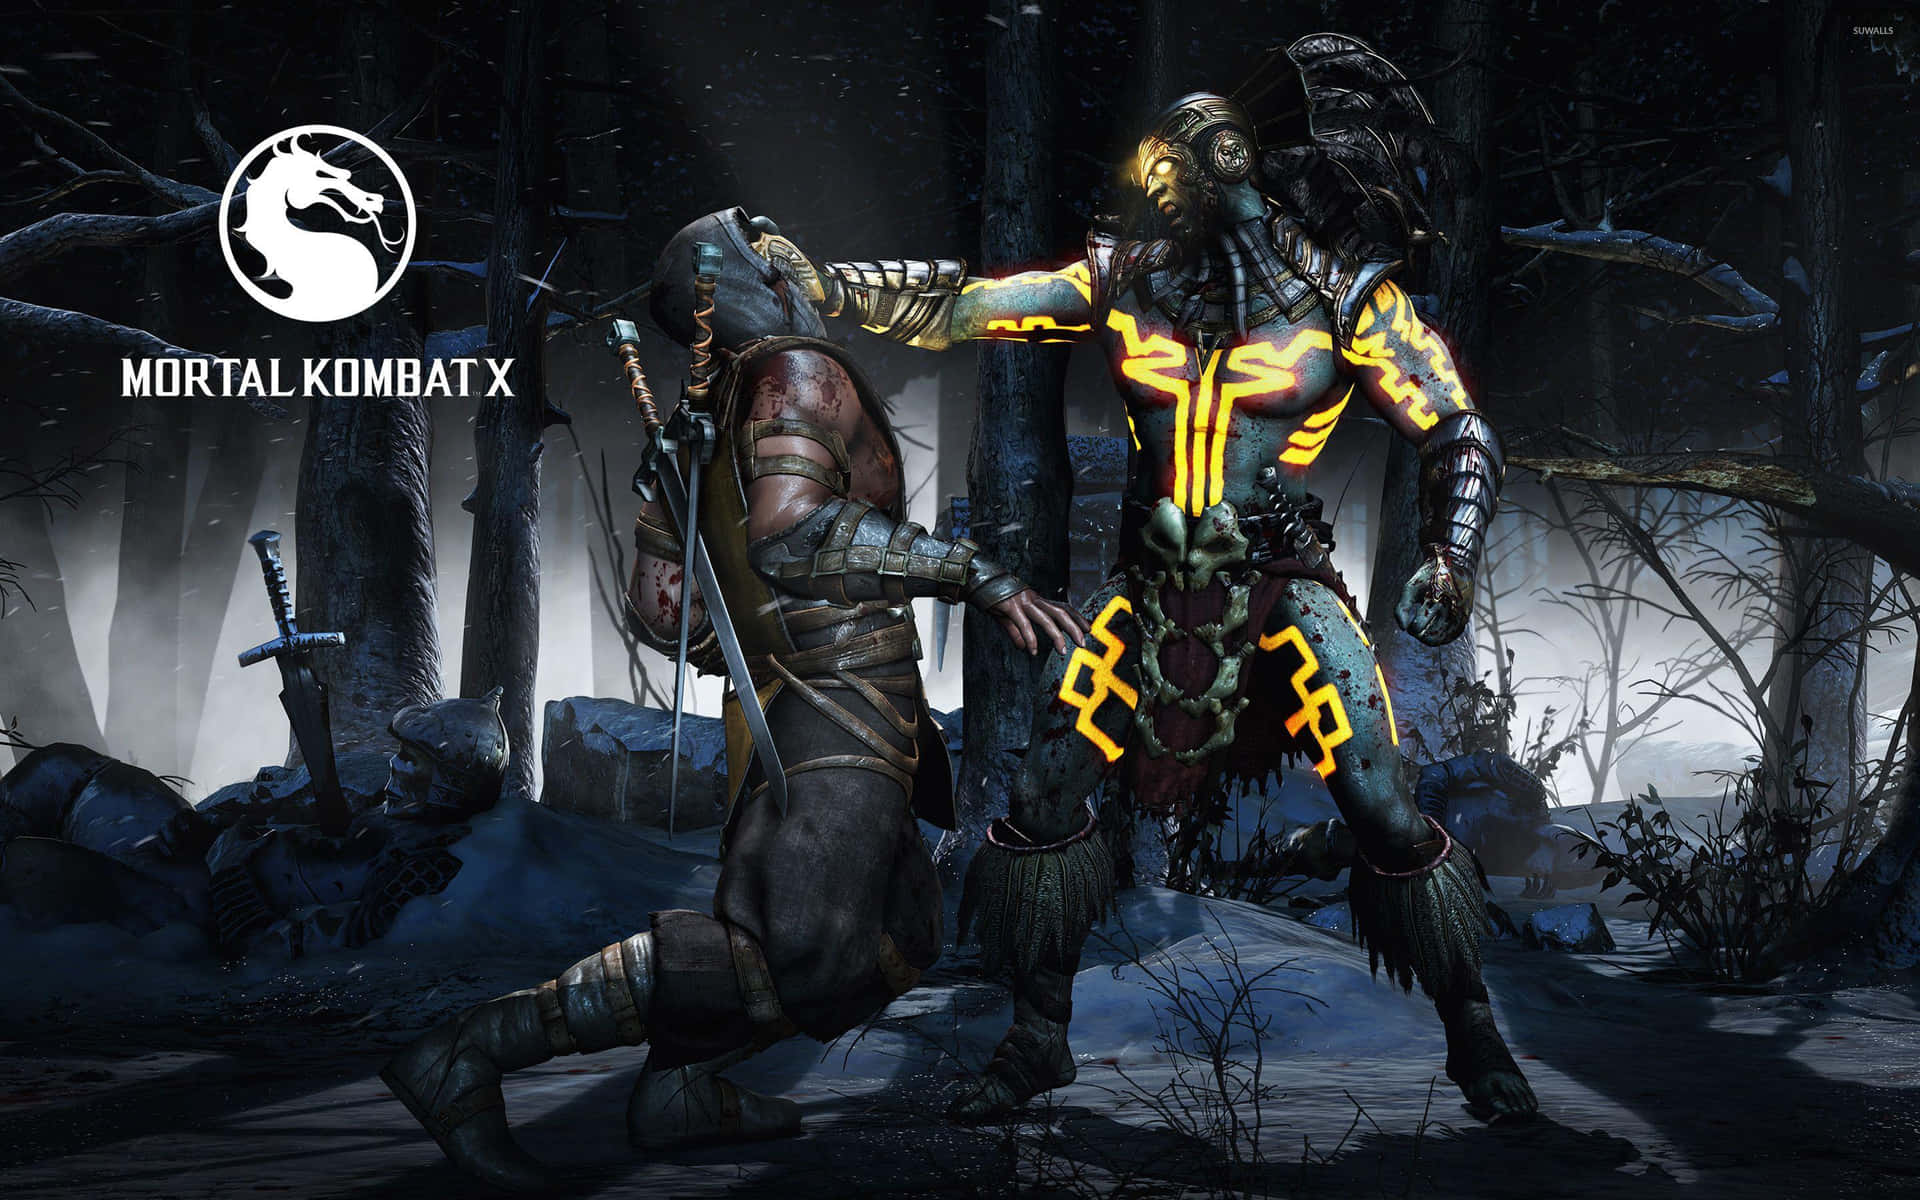 Mortal Kombat X - Iconic Fighters Unleash Their Power